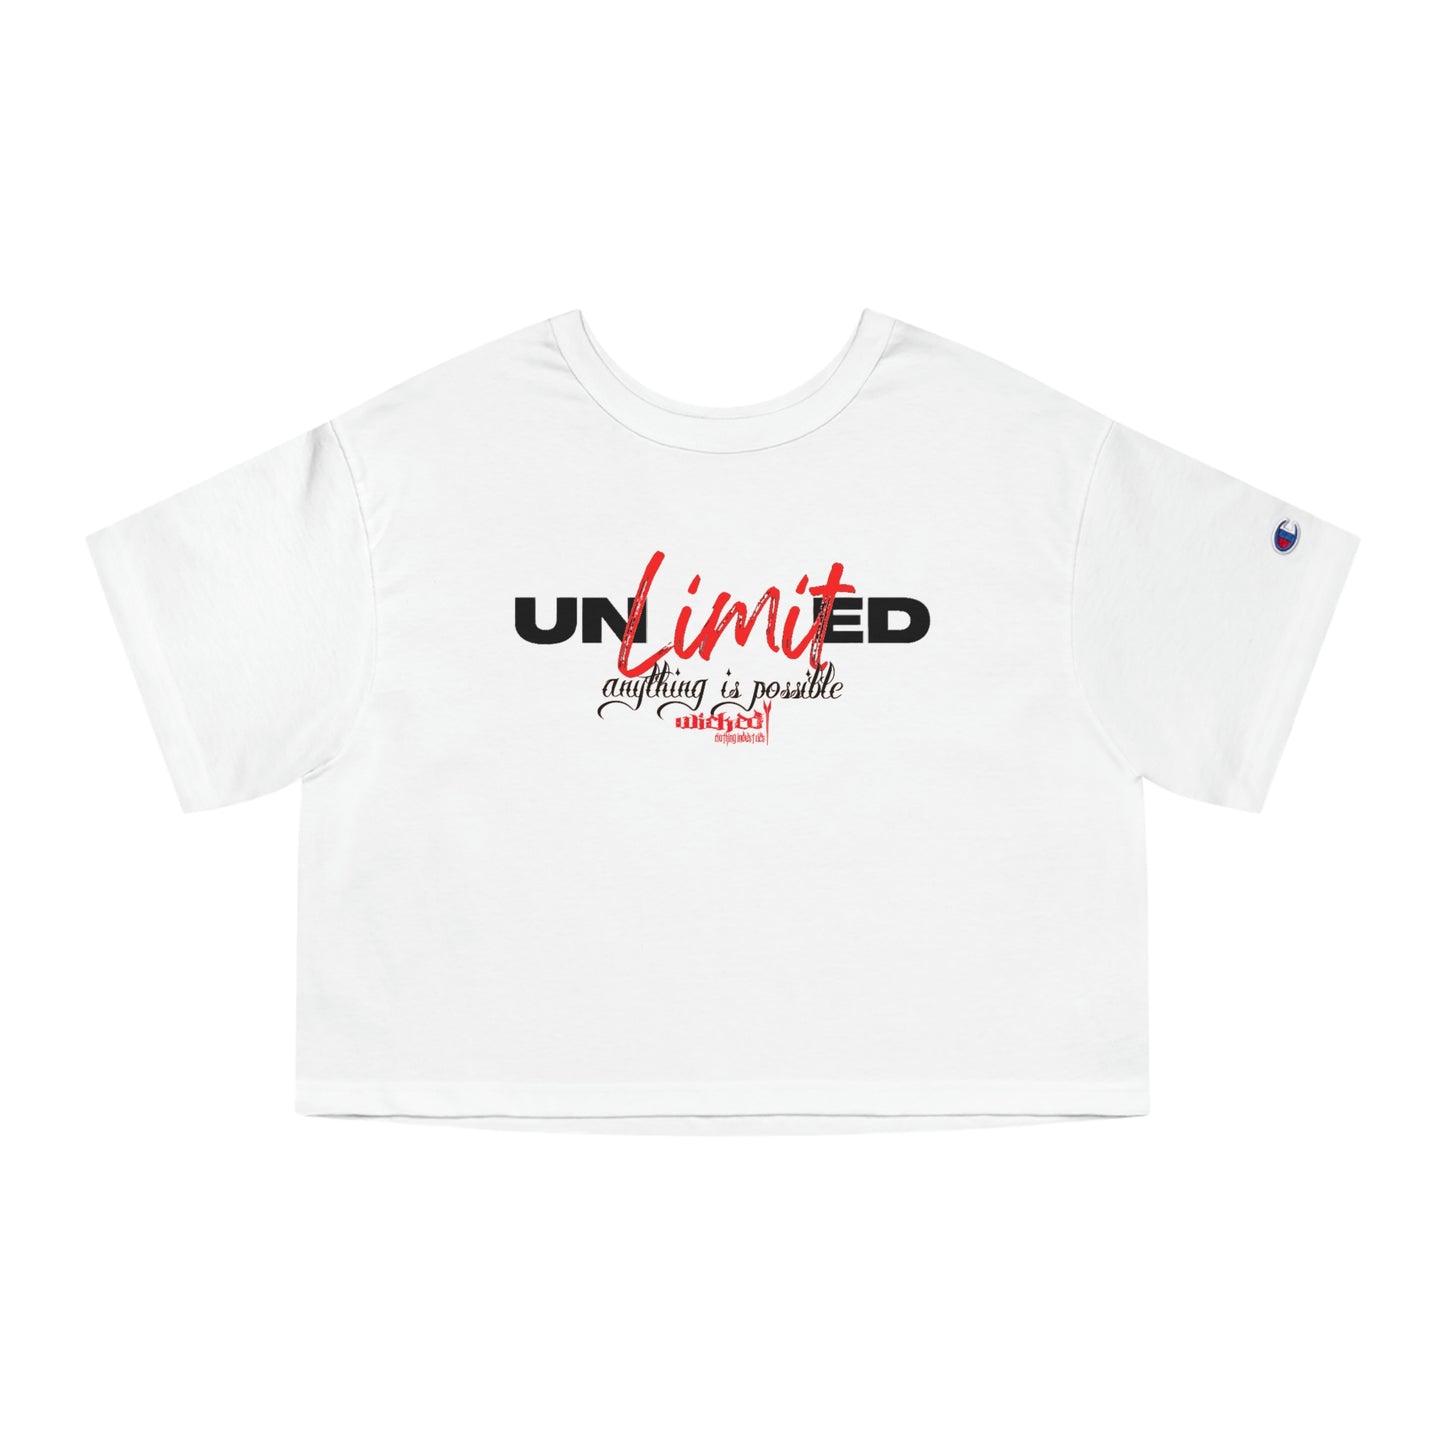 Unlimited 1/ Cropped T-Shirt